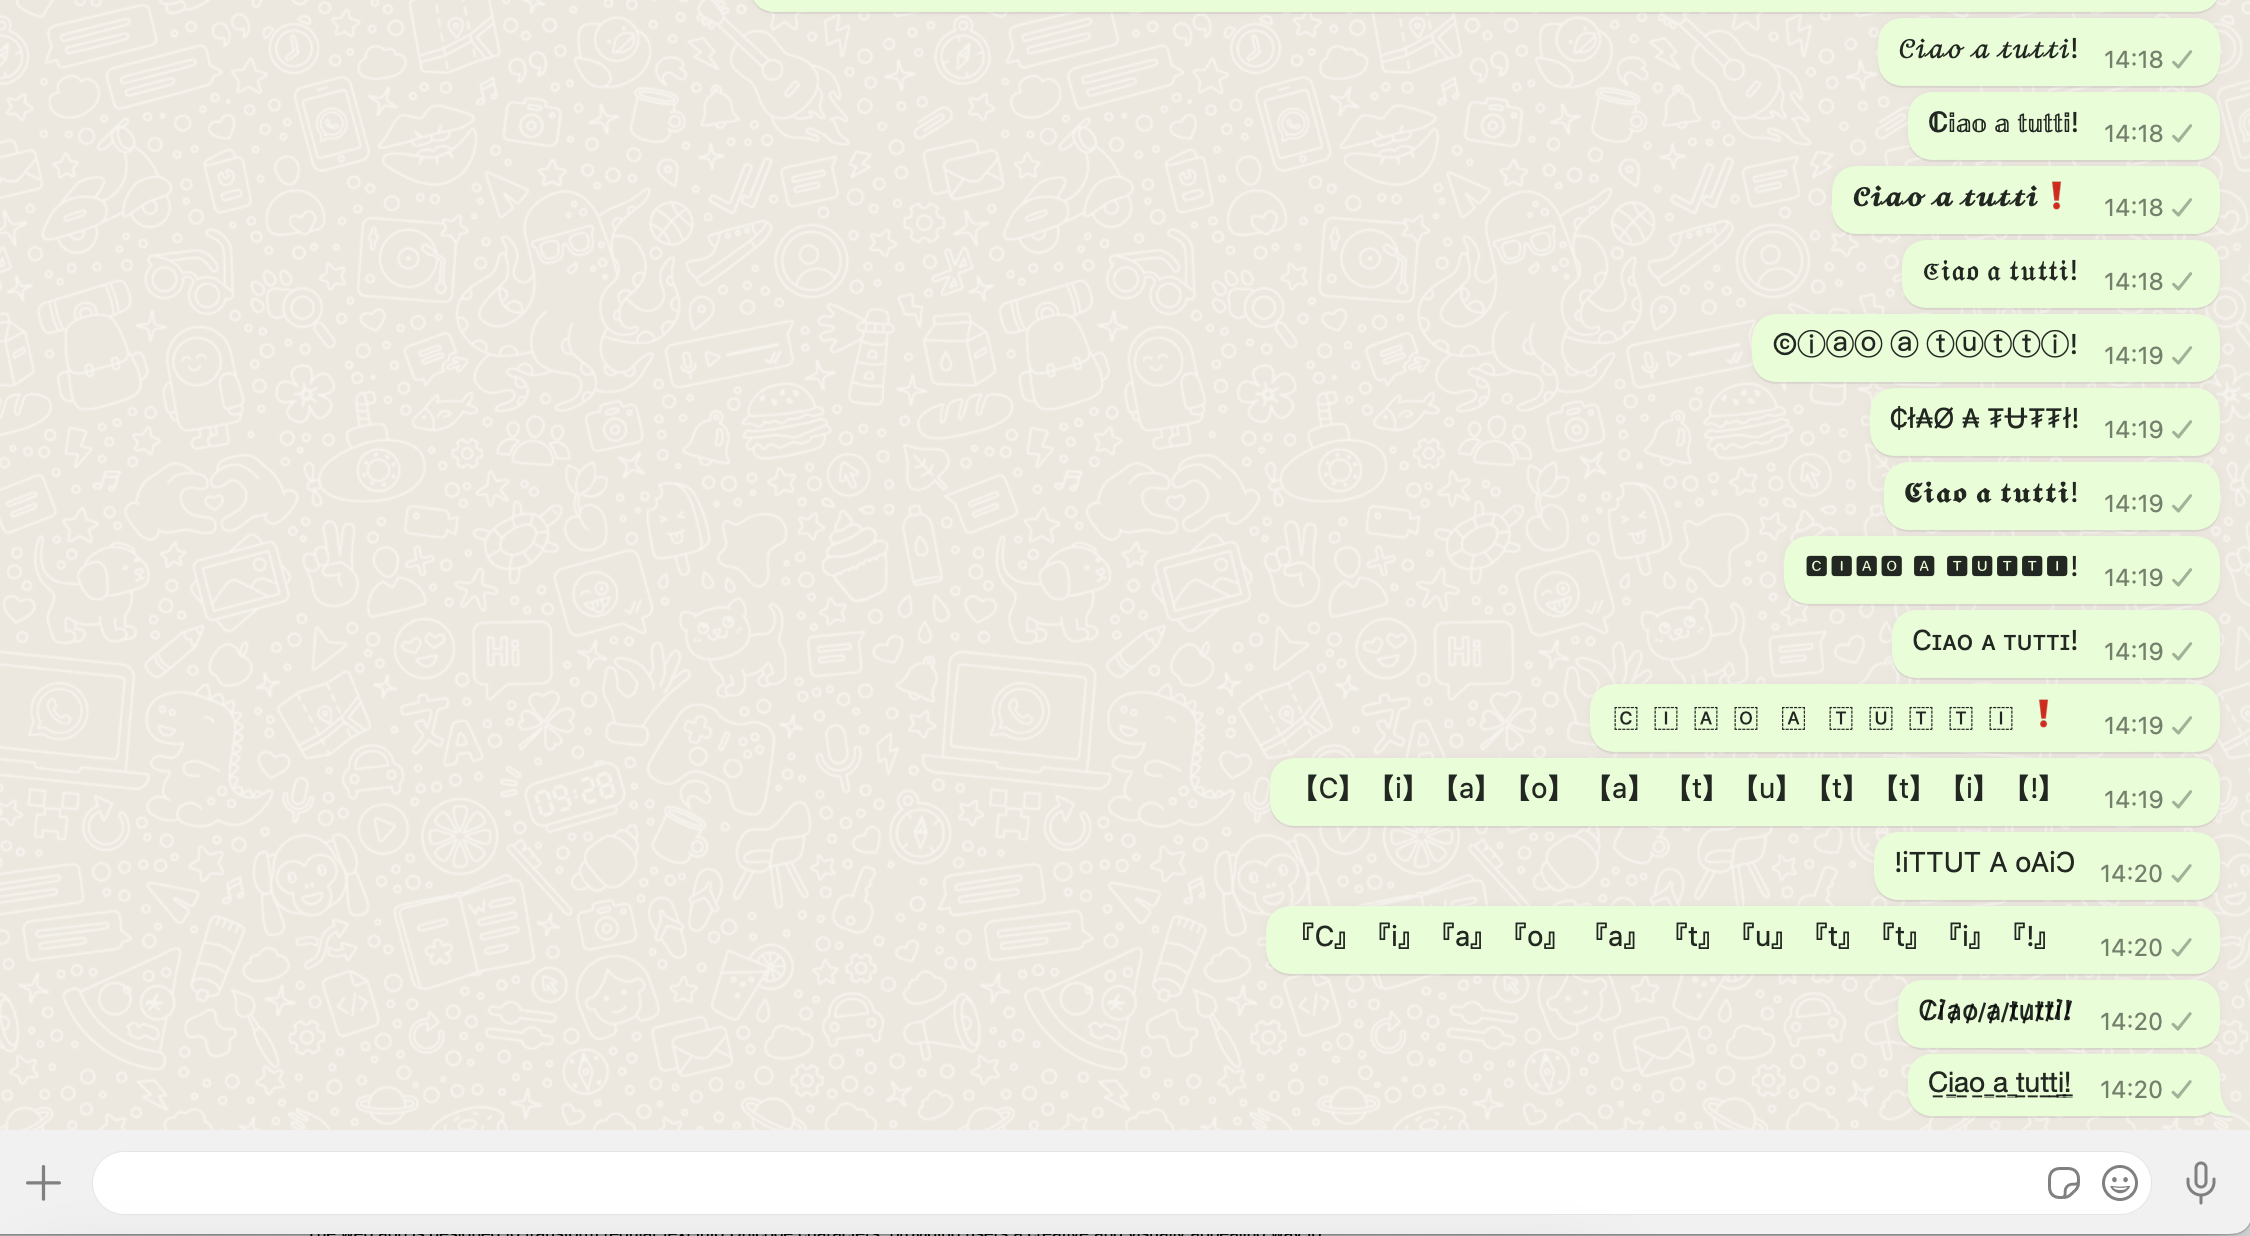 This is how text converted to Unicode appears on WhatsApp